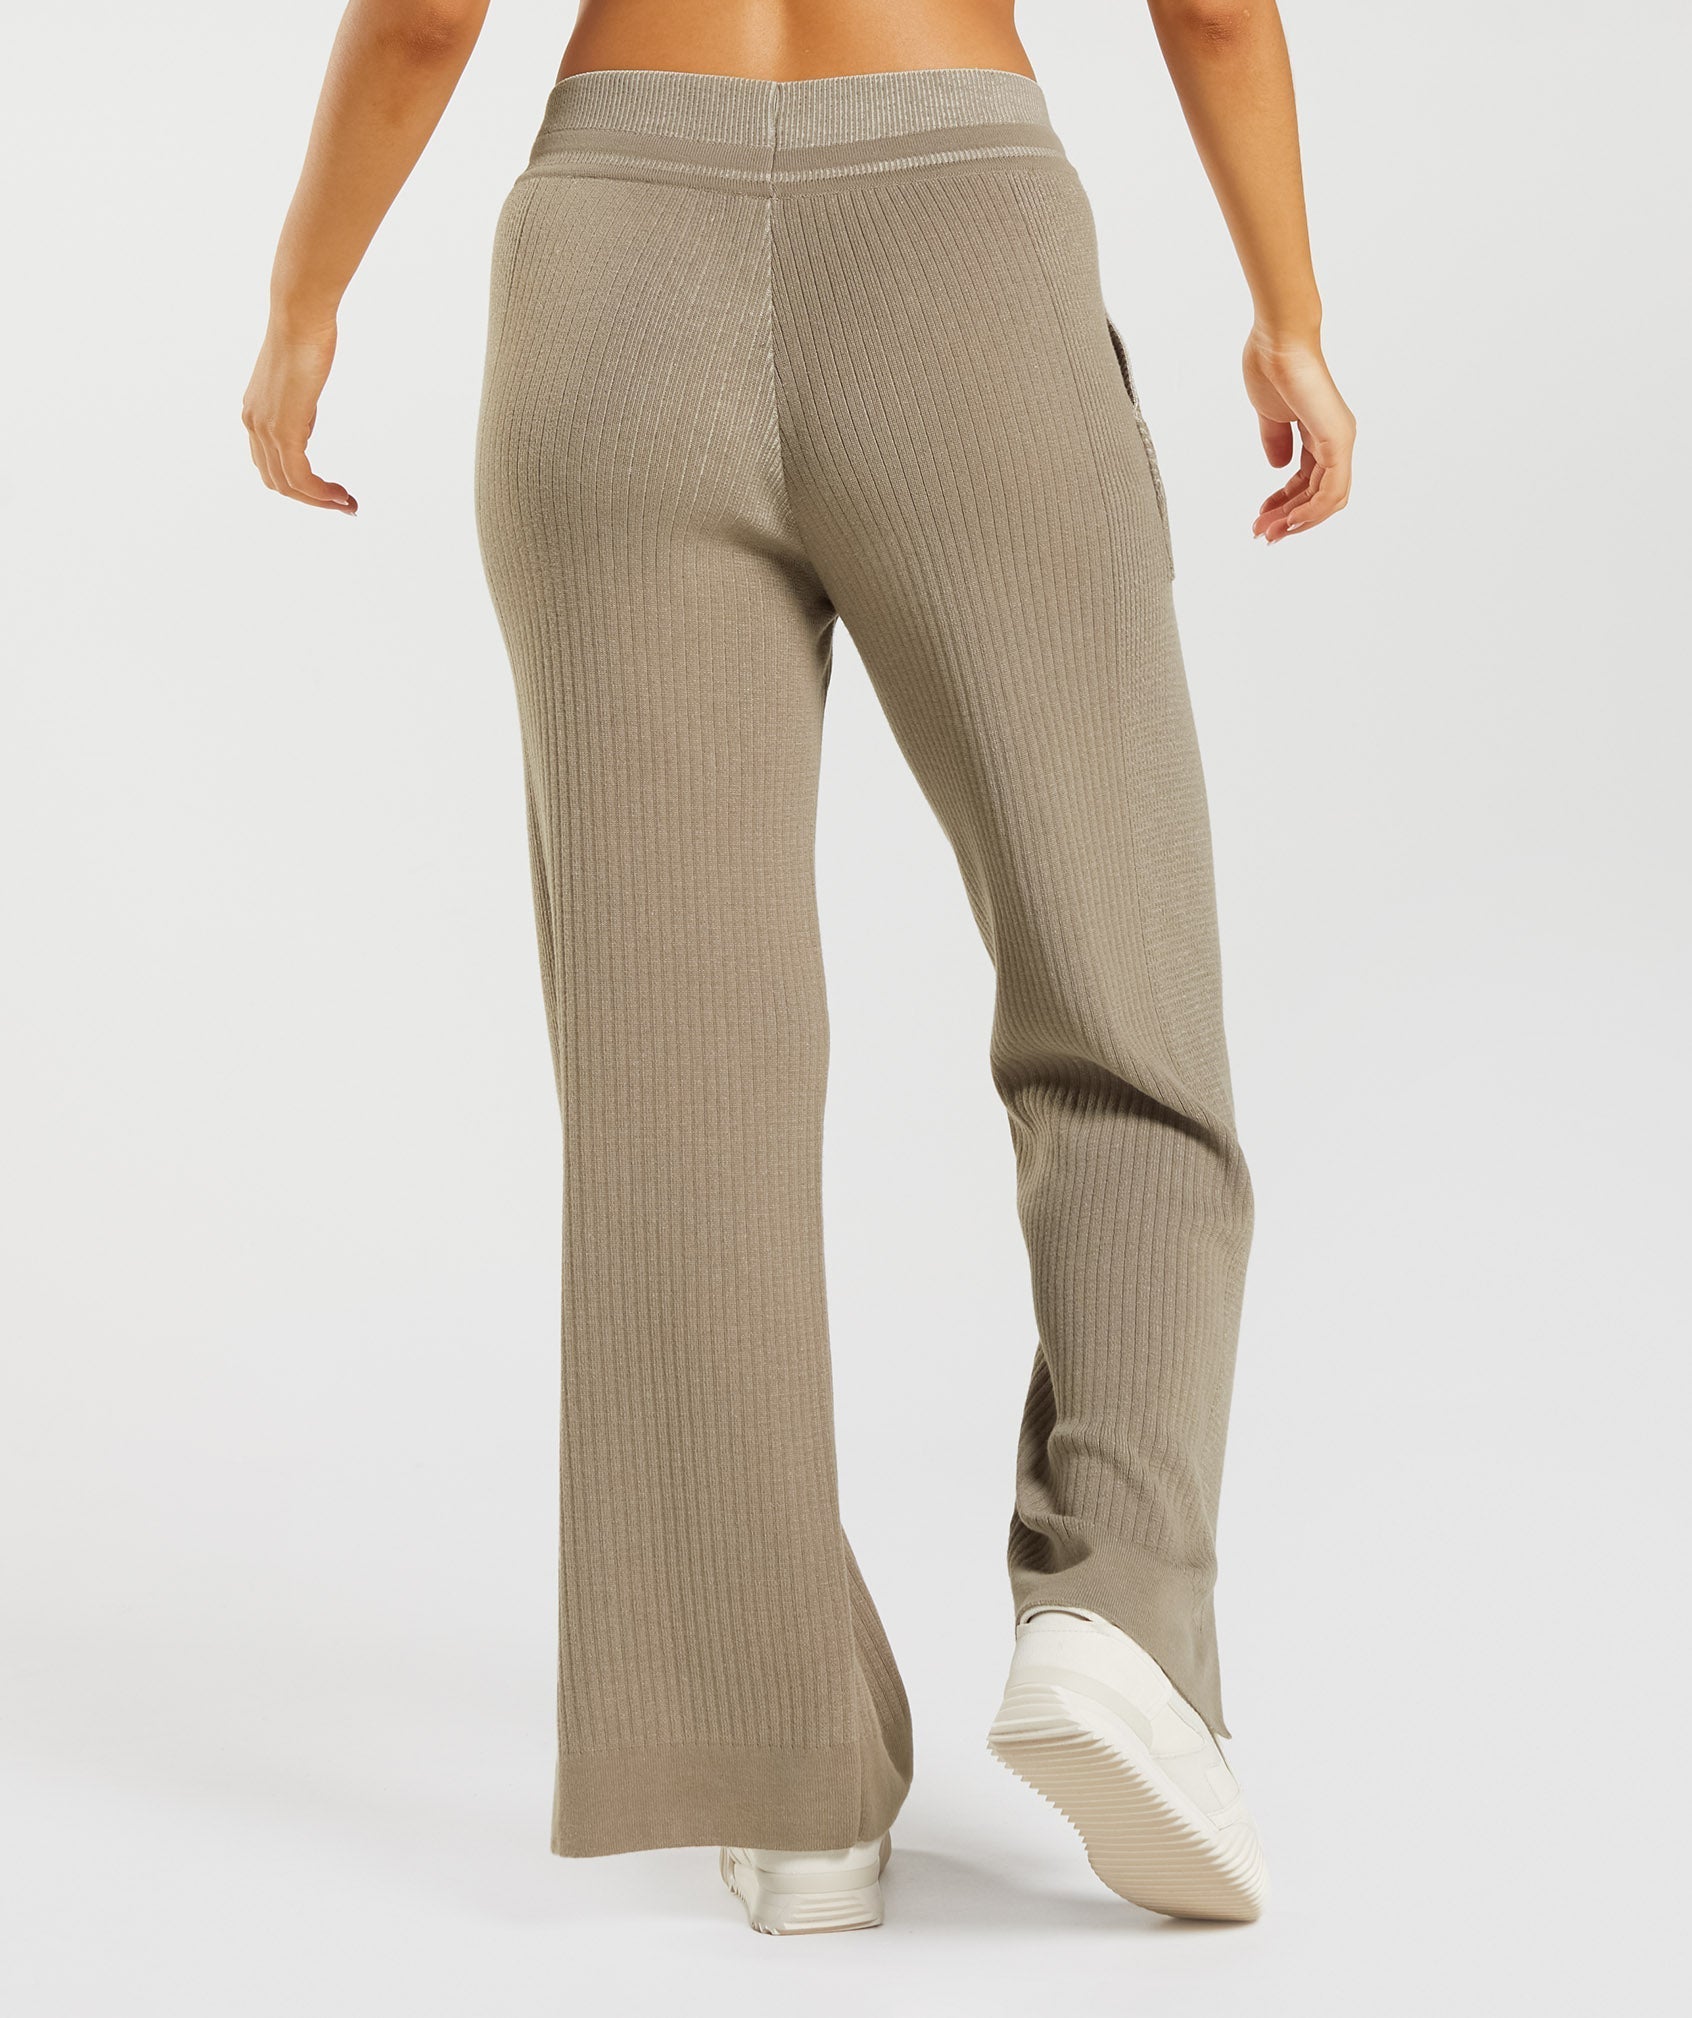 Pause Knitwear Joggers in Cement Brown/Pebble Grey - view 3